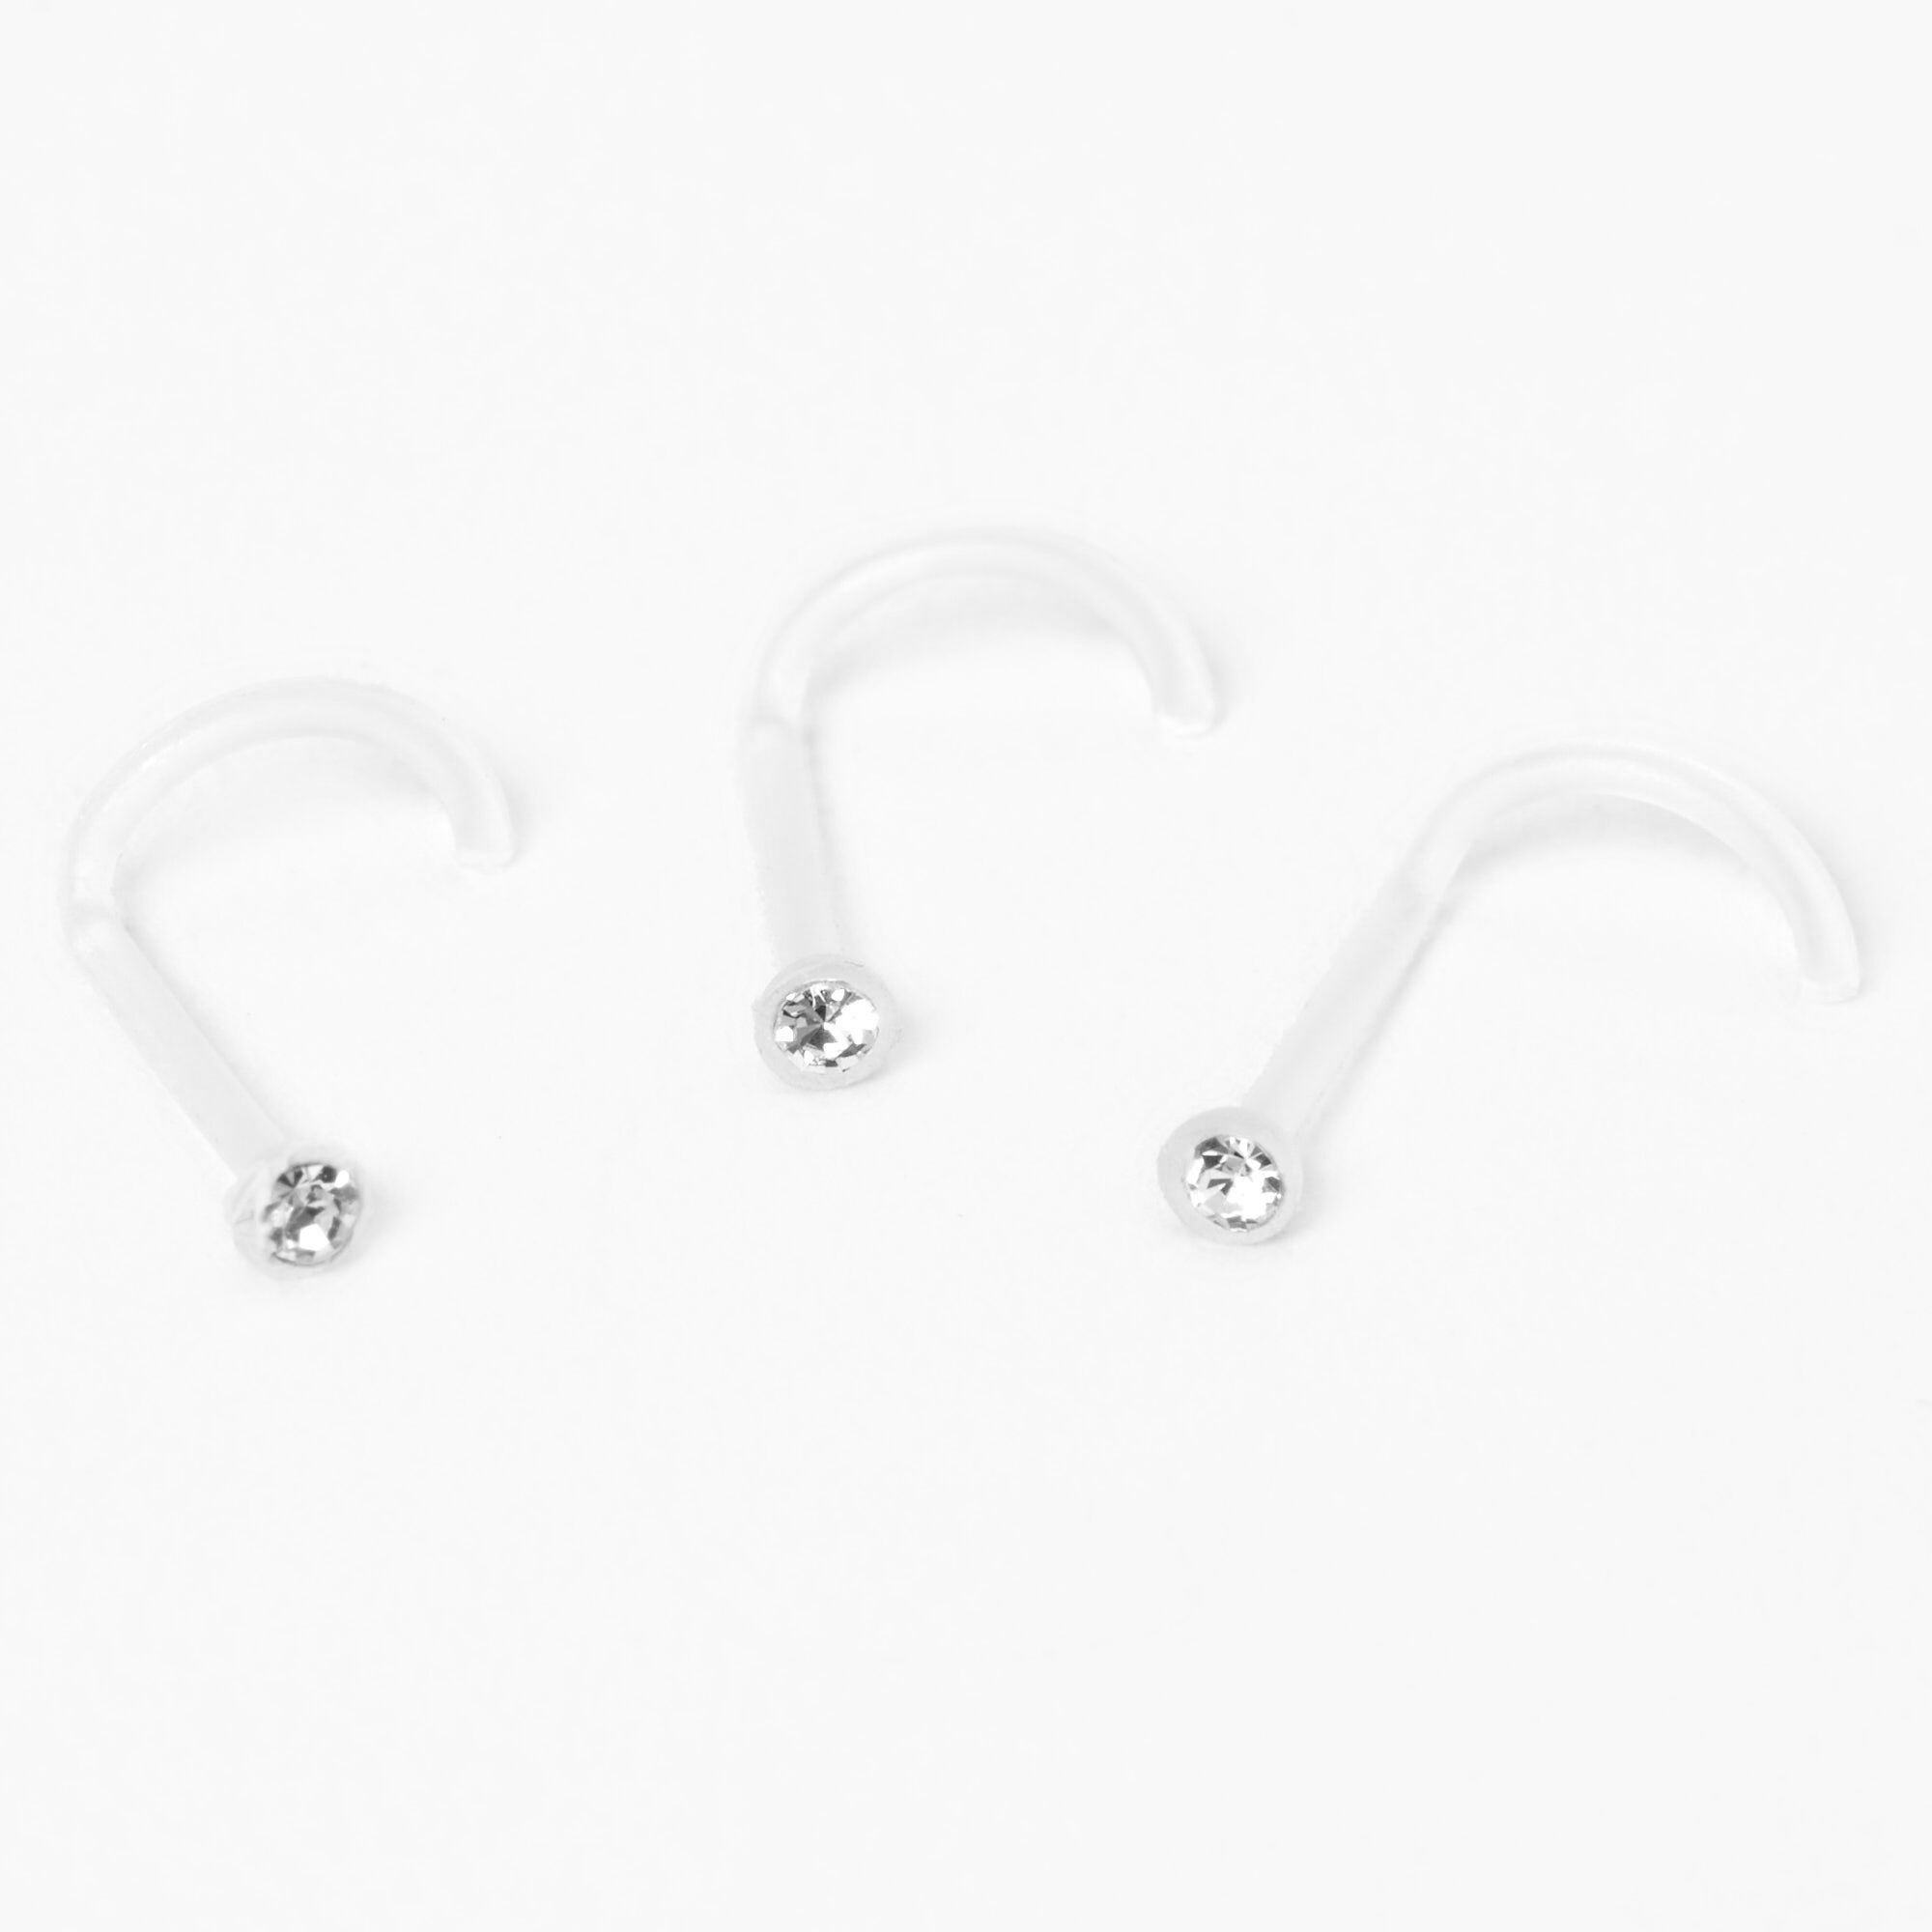 20G Clear Nose Studs Nose Piercing Retainer, Plastic Nose